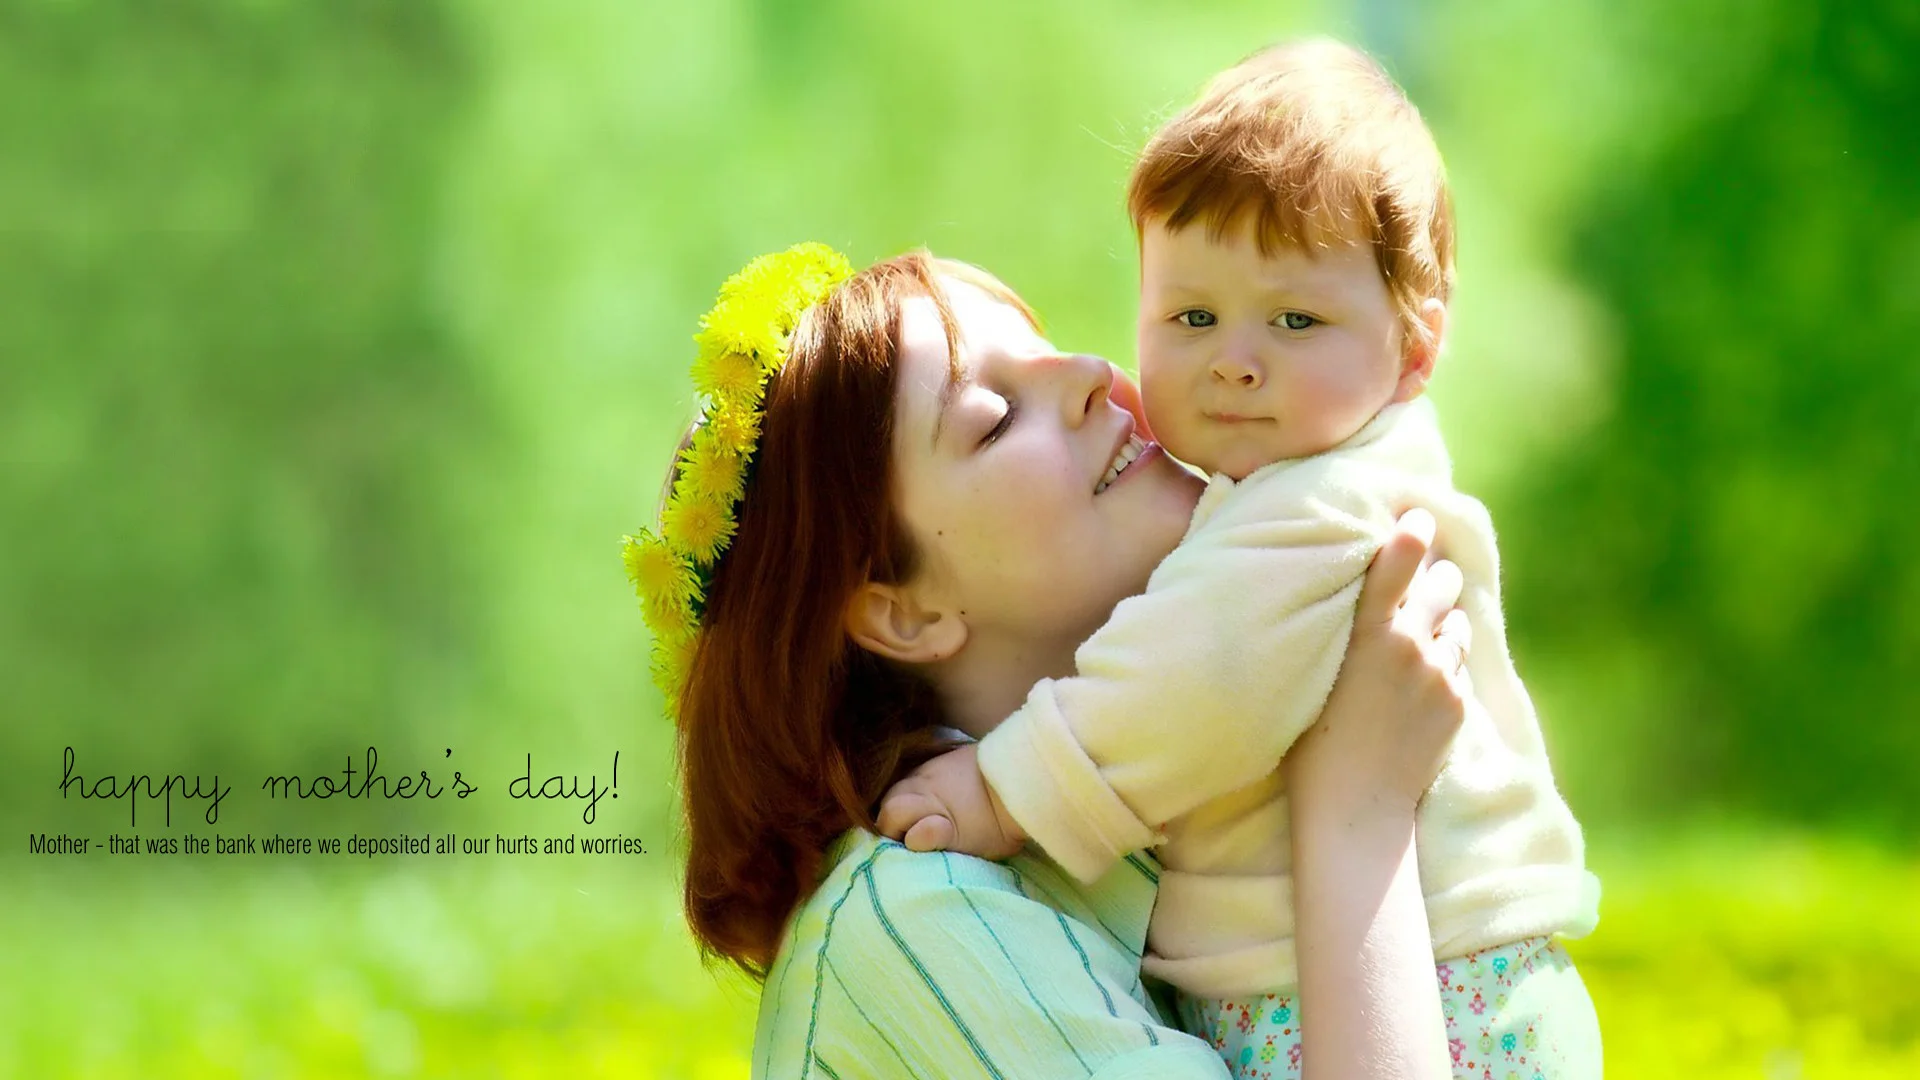 Mother's Day Background – Wallpaper, High Definition, High Quality .